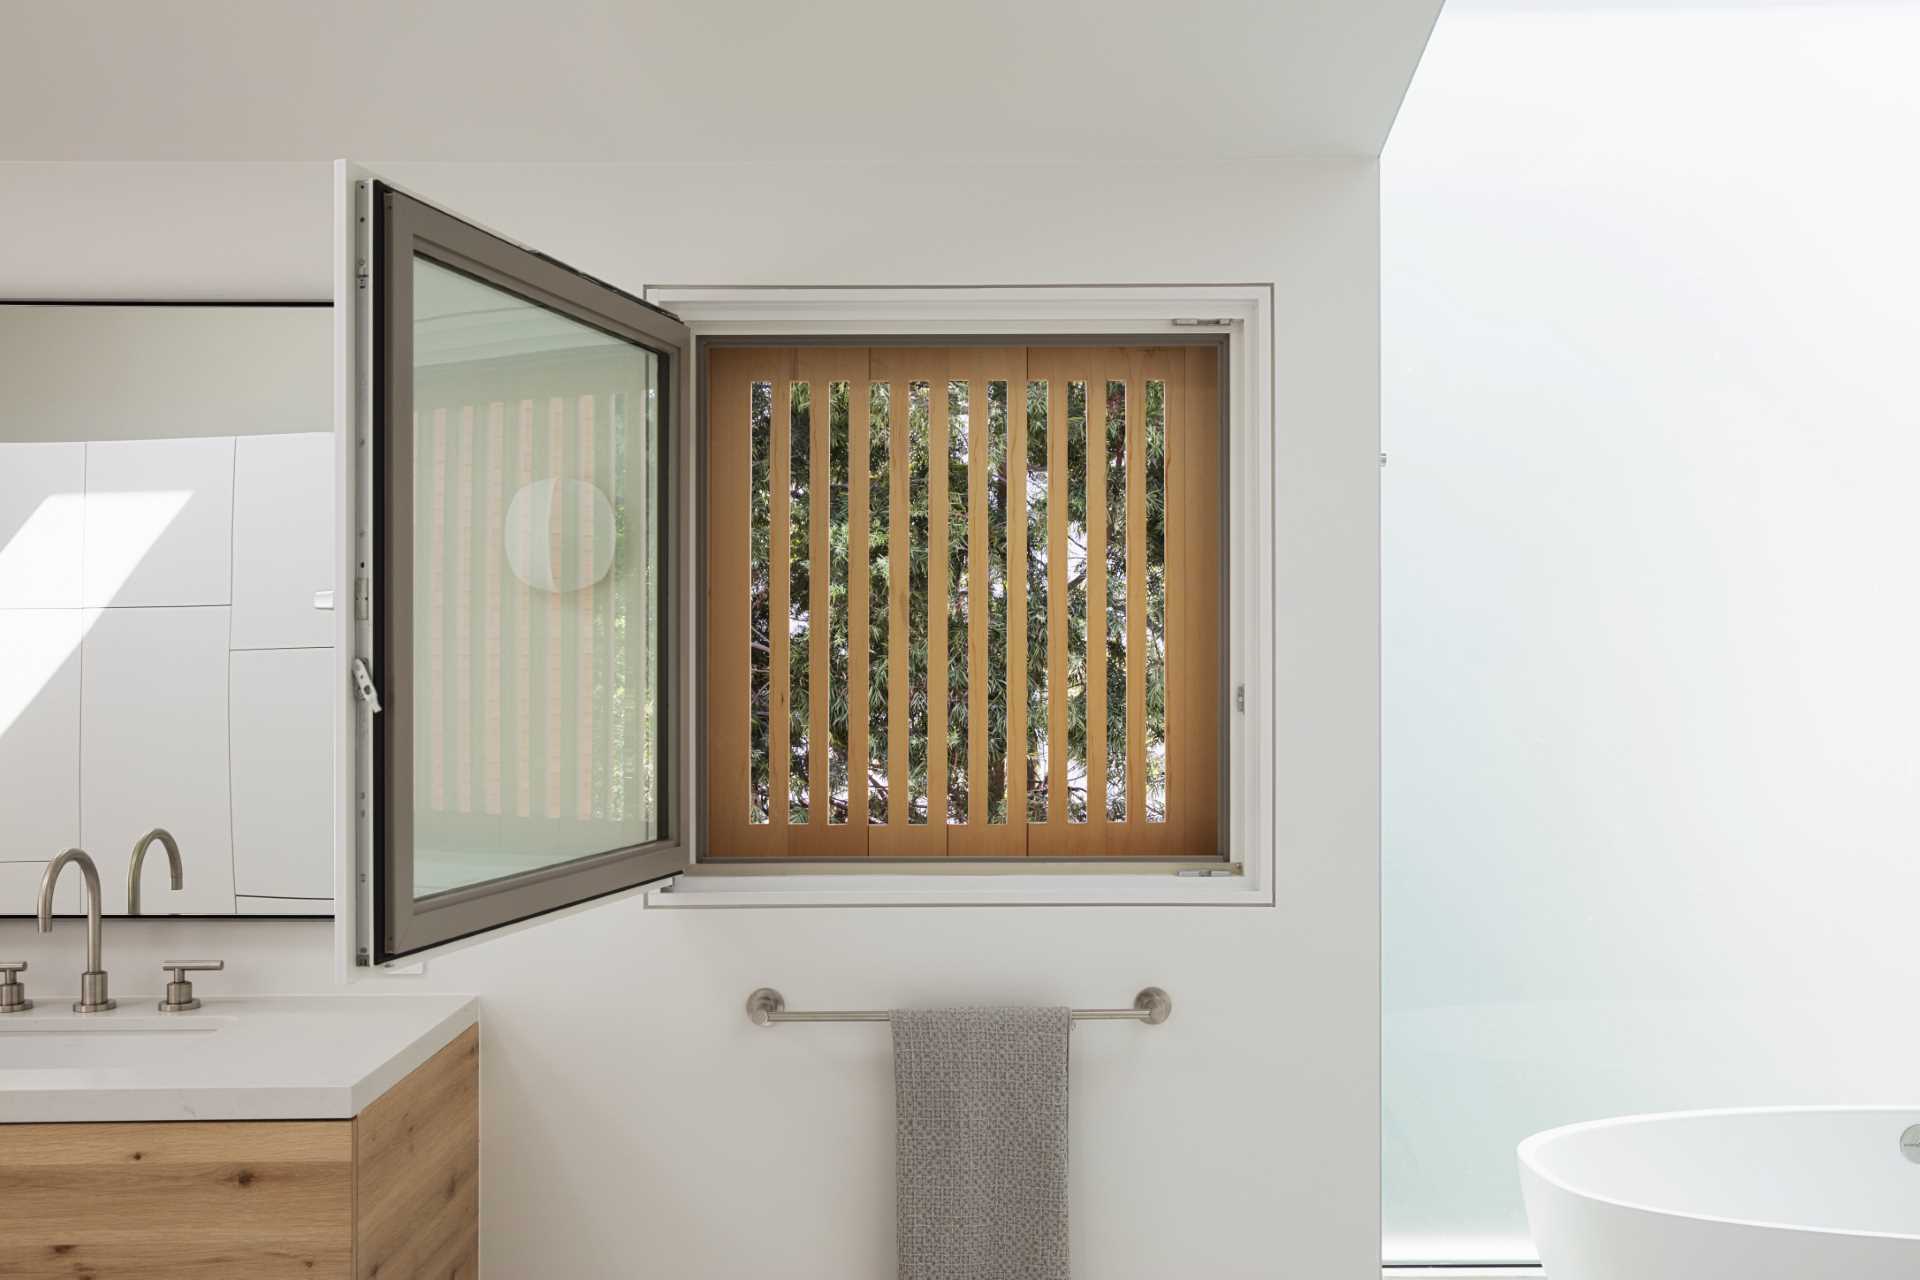 In this primary bathroom, the freestanding bathtub is positioned in front of the large window, while a secondary window by the vanity has wood slats providing privacy even when the window is open.